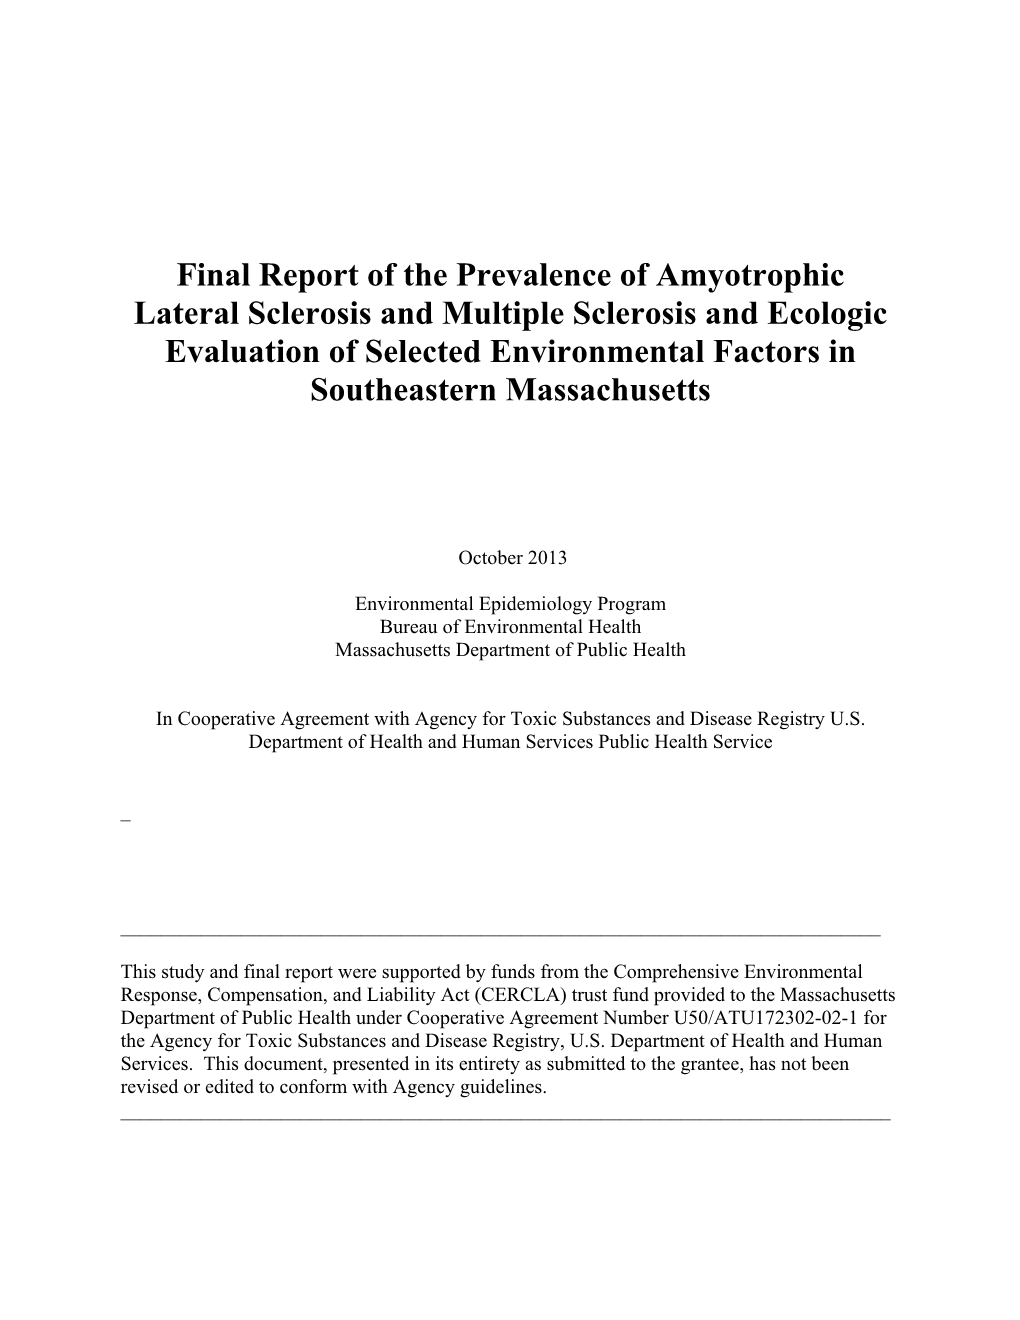 Prevalence of Amyotrophic Lateral Sclerosis and Multiple Sclerosis and Ecologic Evaluation of Selected Environmental Factors in Southeastern Massachusetts